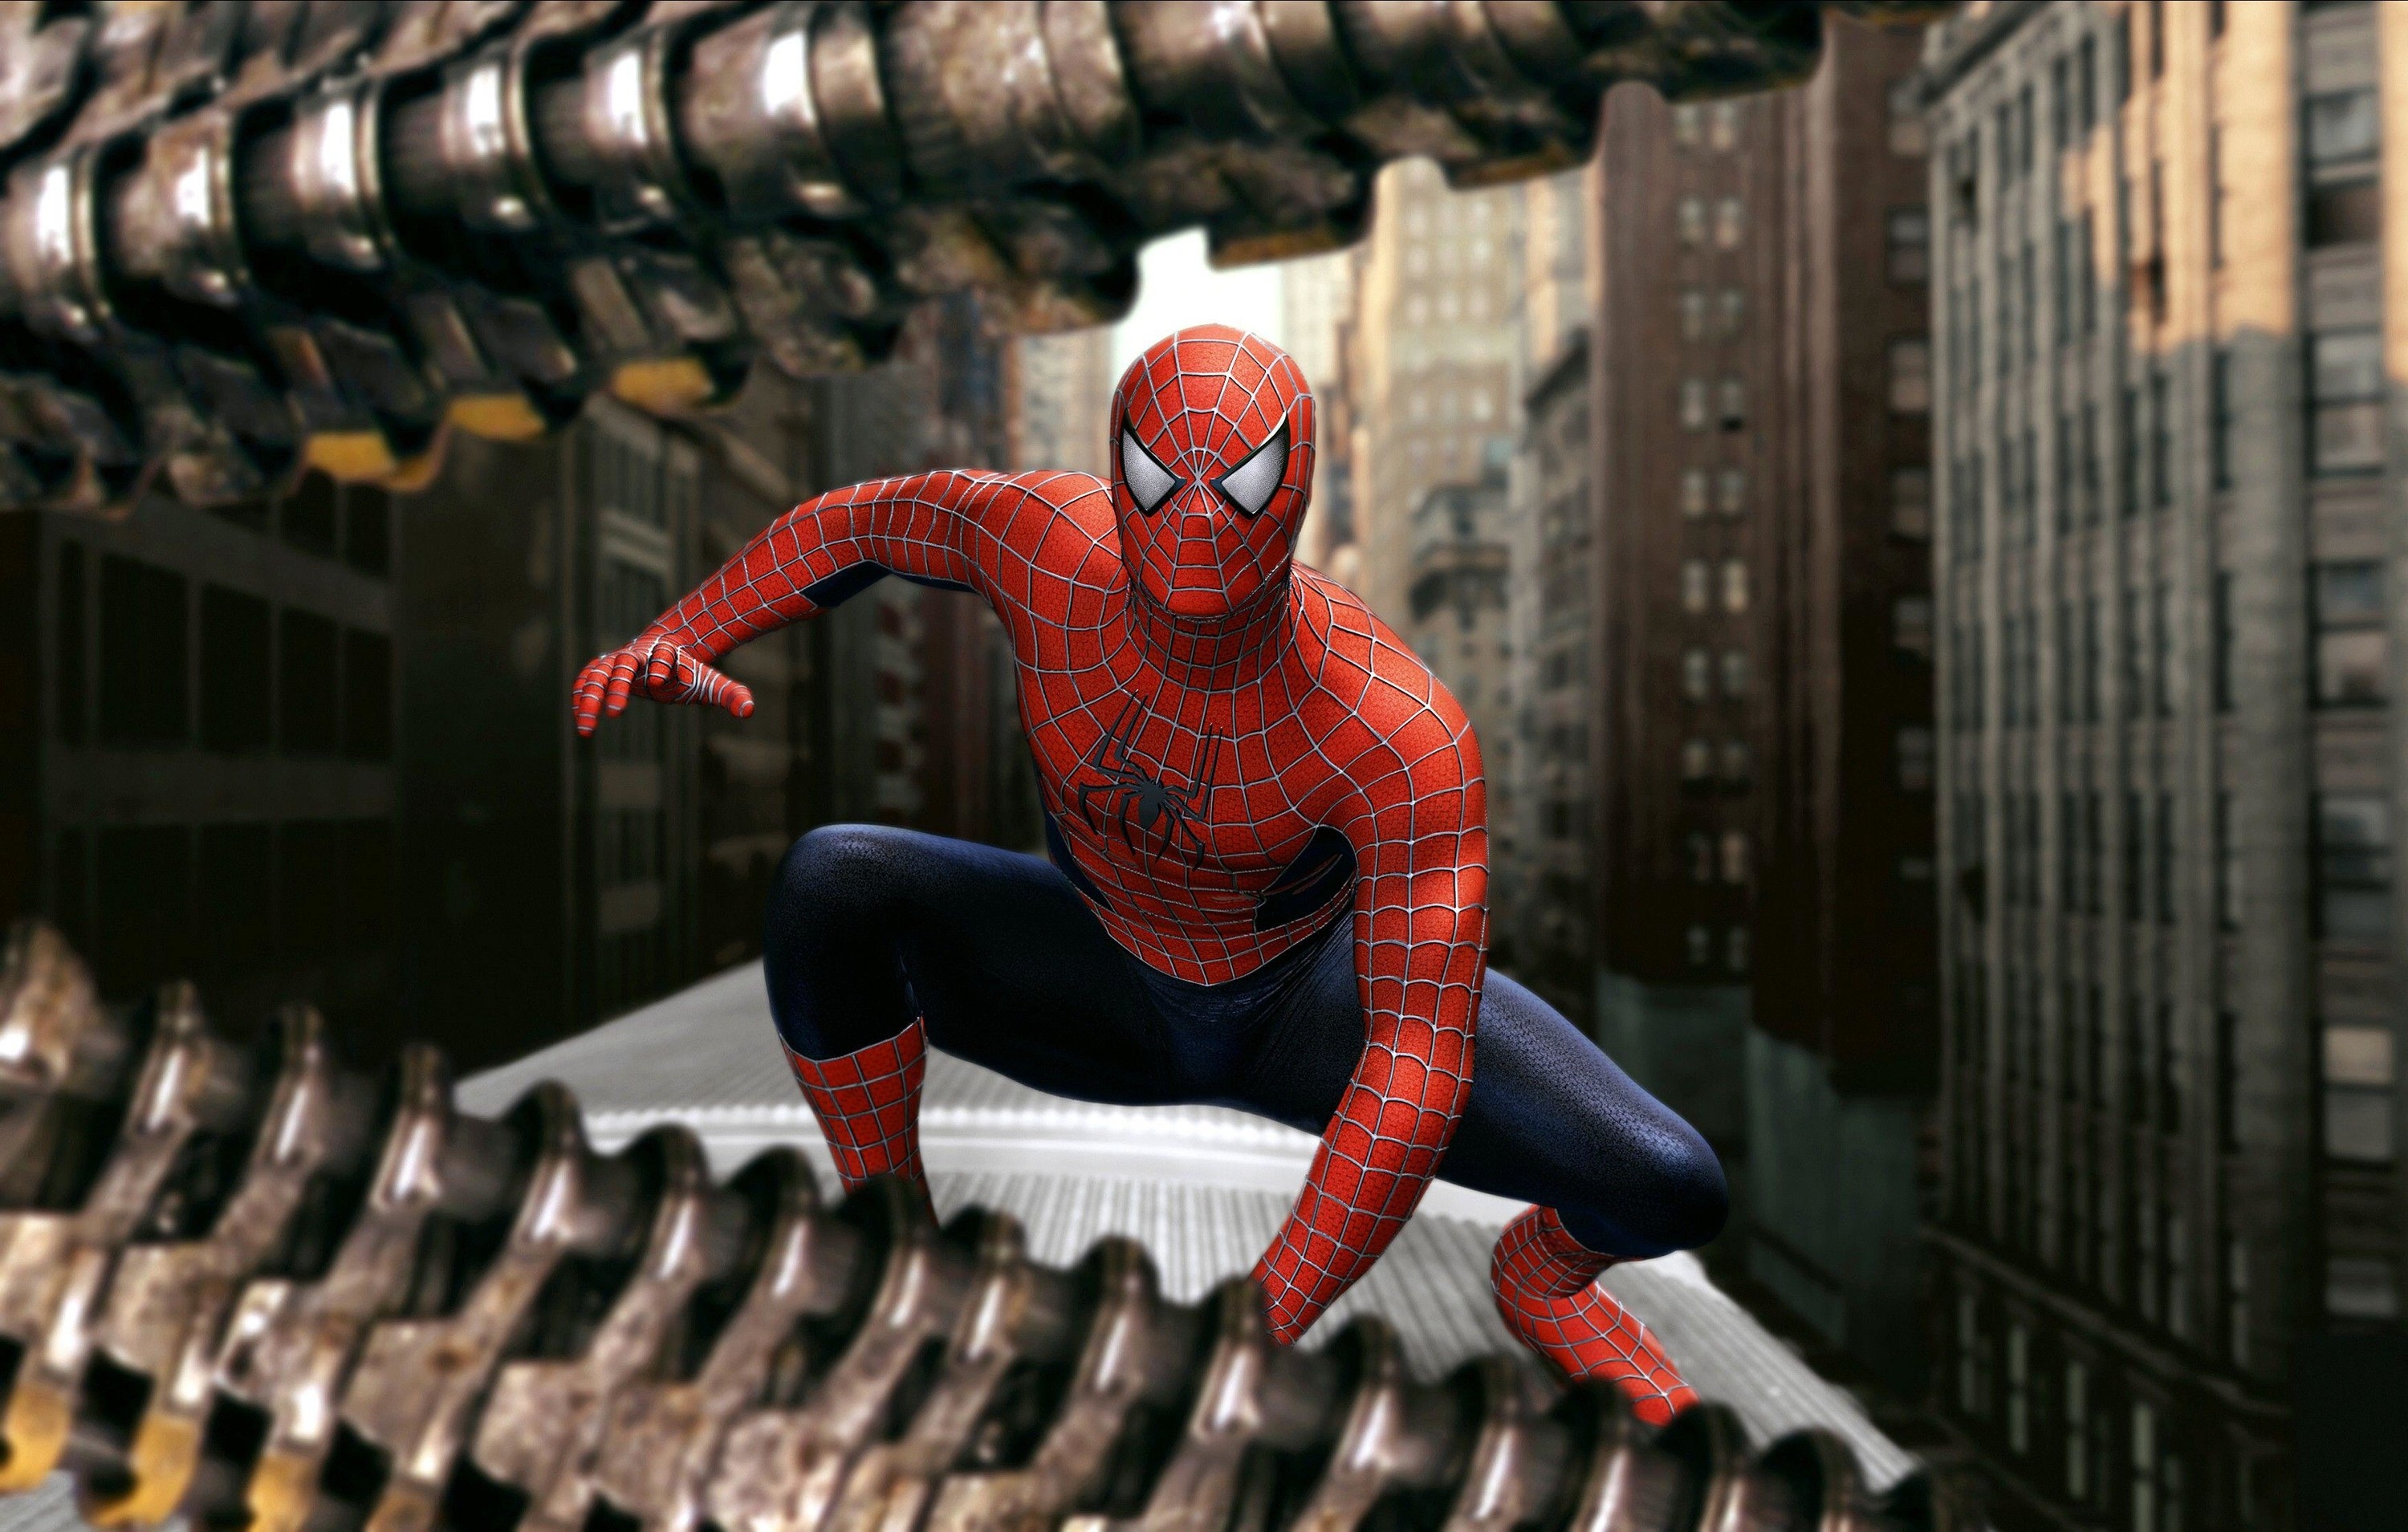 Spider-Man crouches on top of a subway train in front of industrial metal tentacles